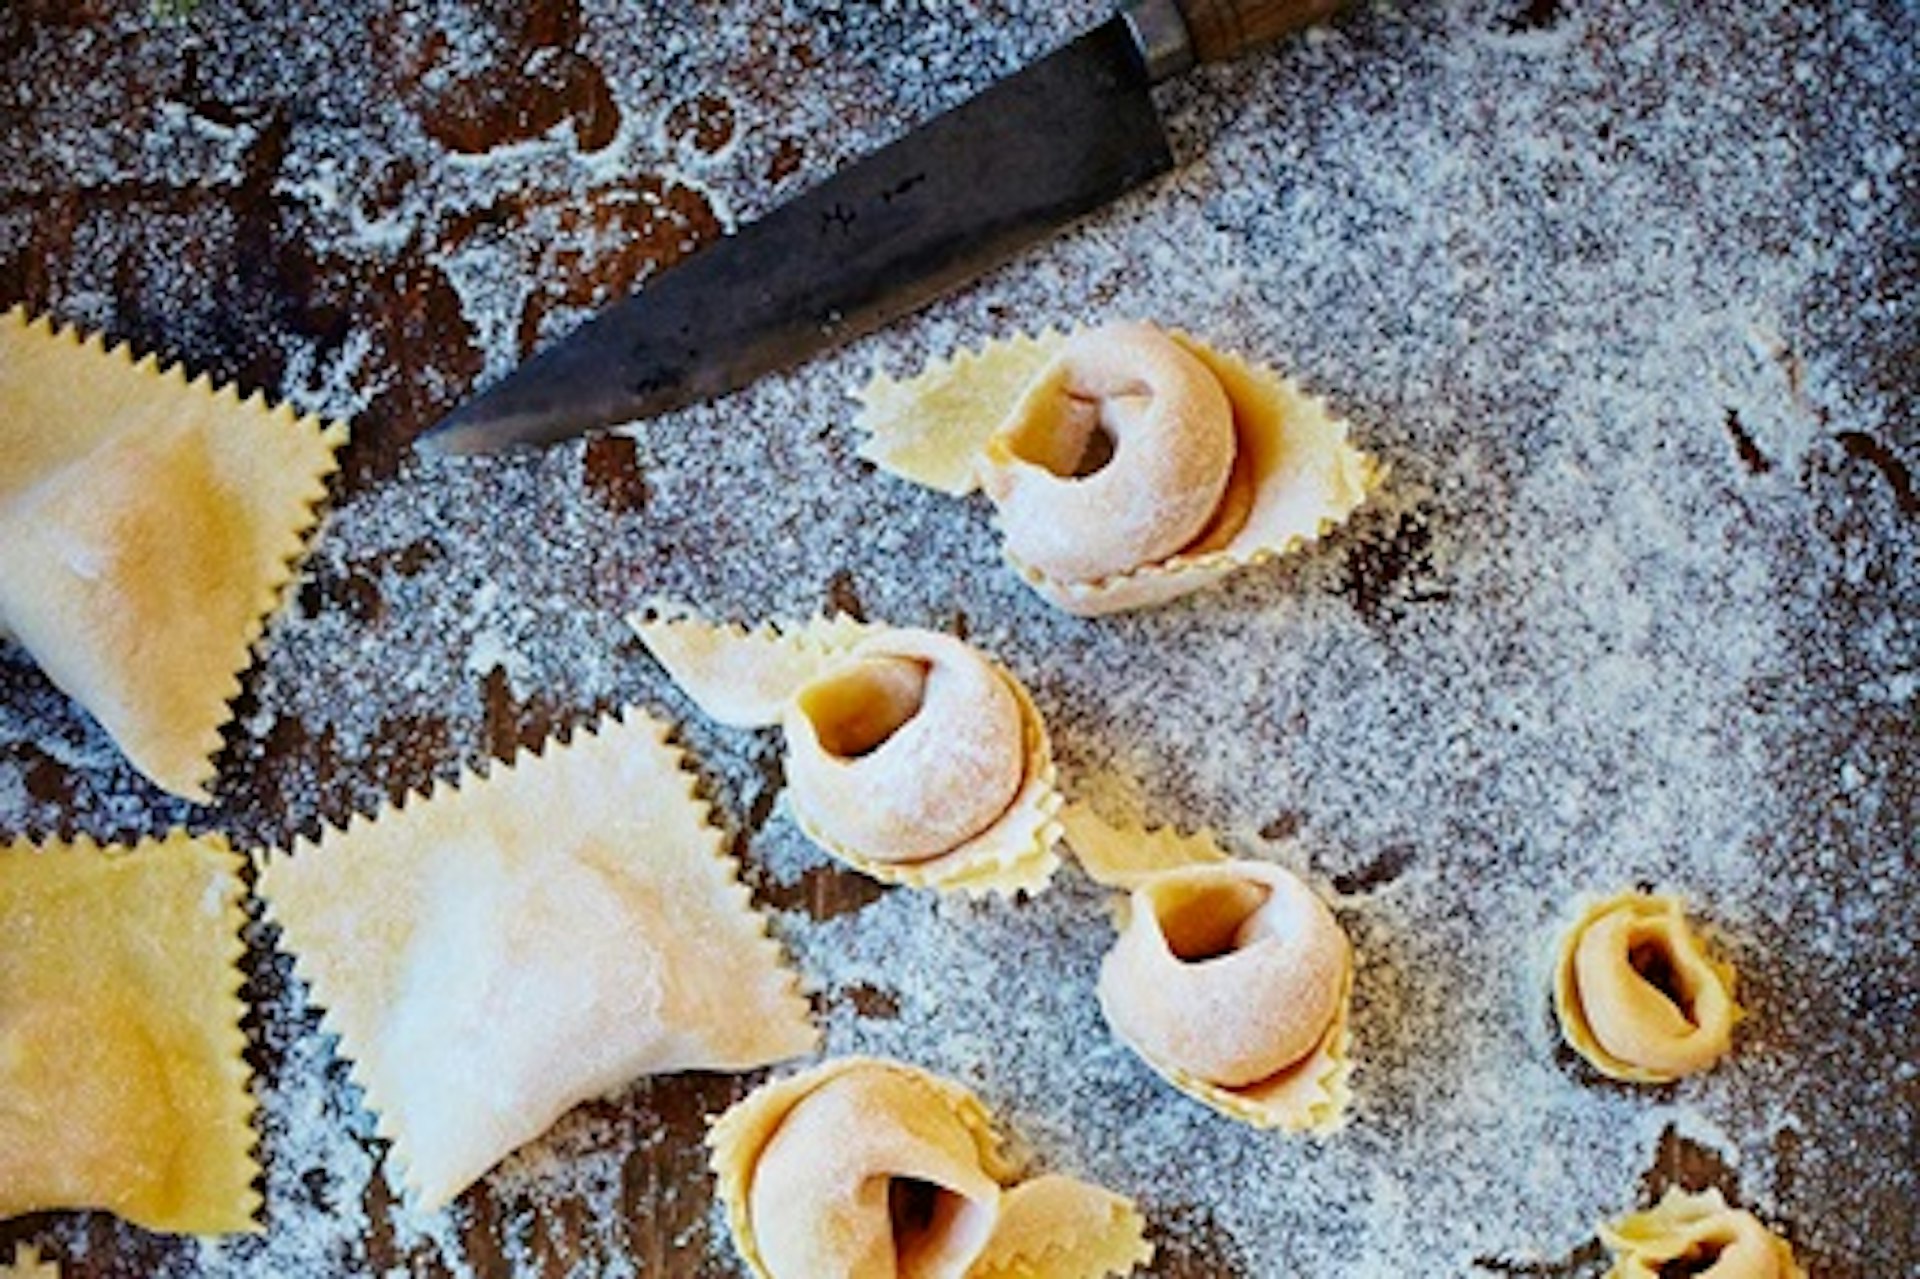 Showstopping Ravioli Class at The Jamie Oliver Cookery School 2